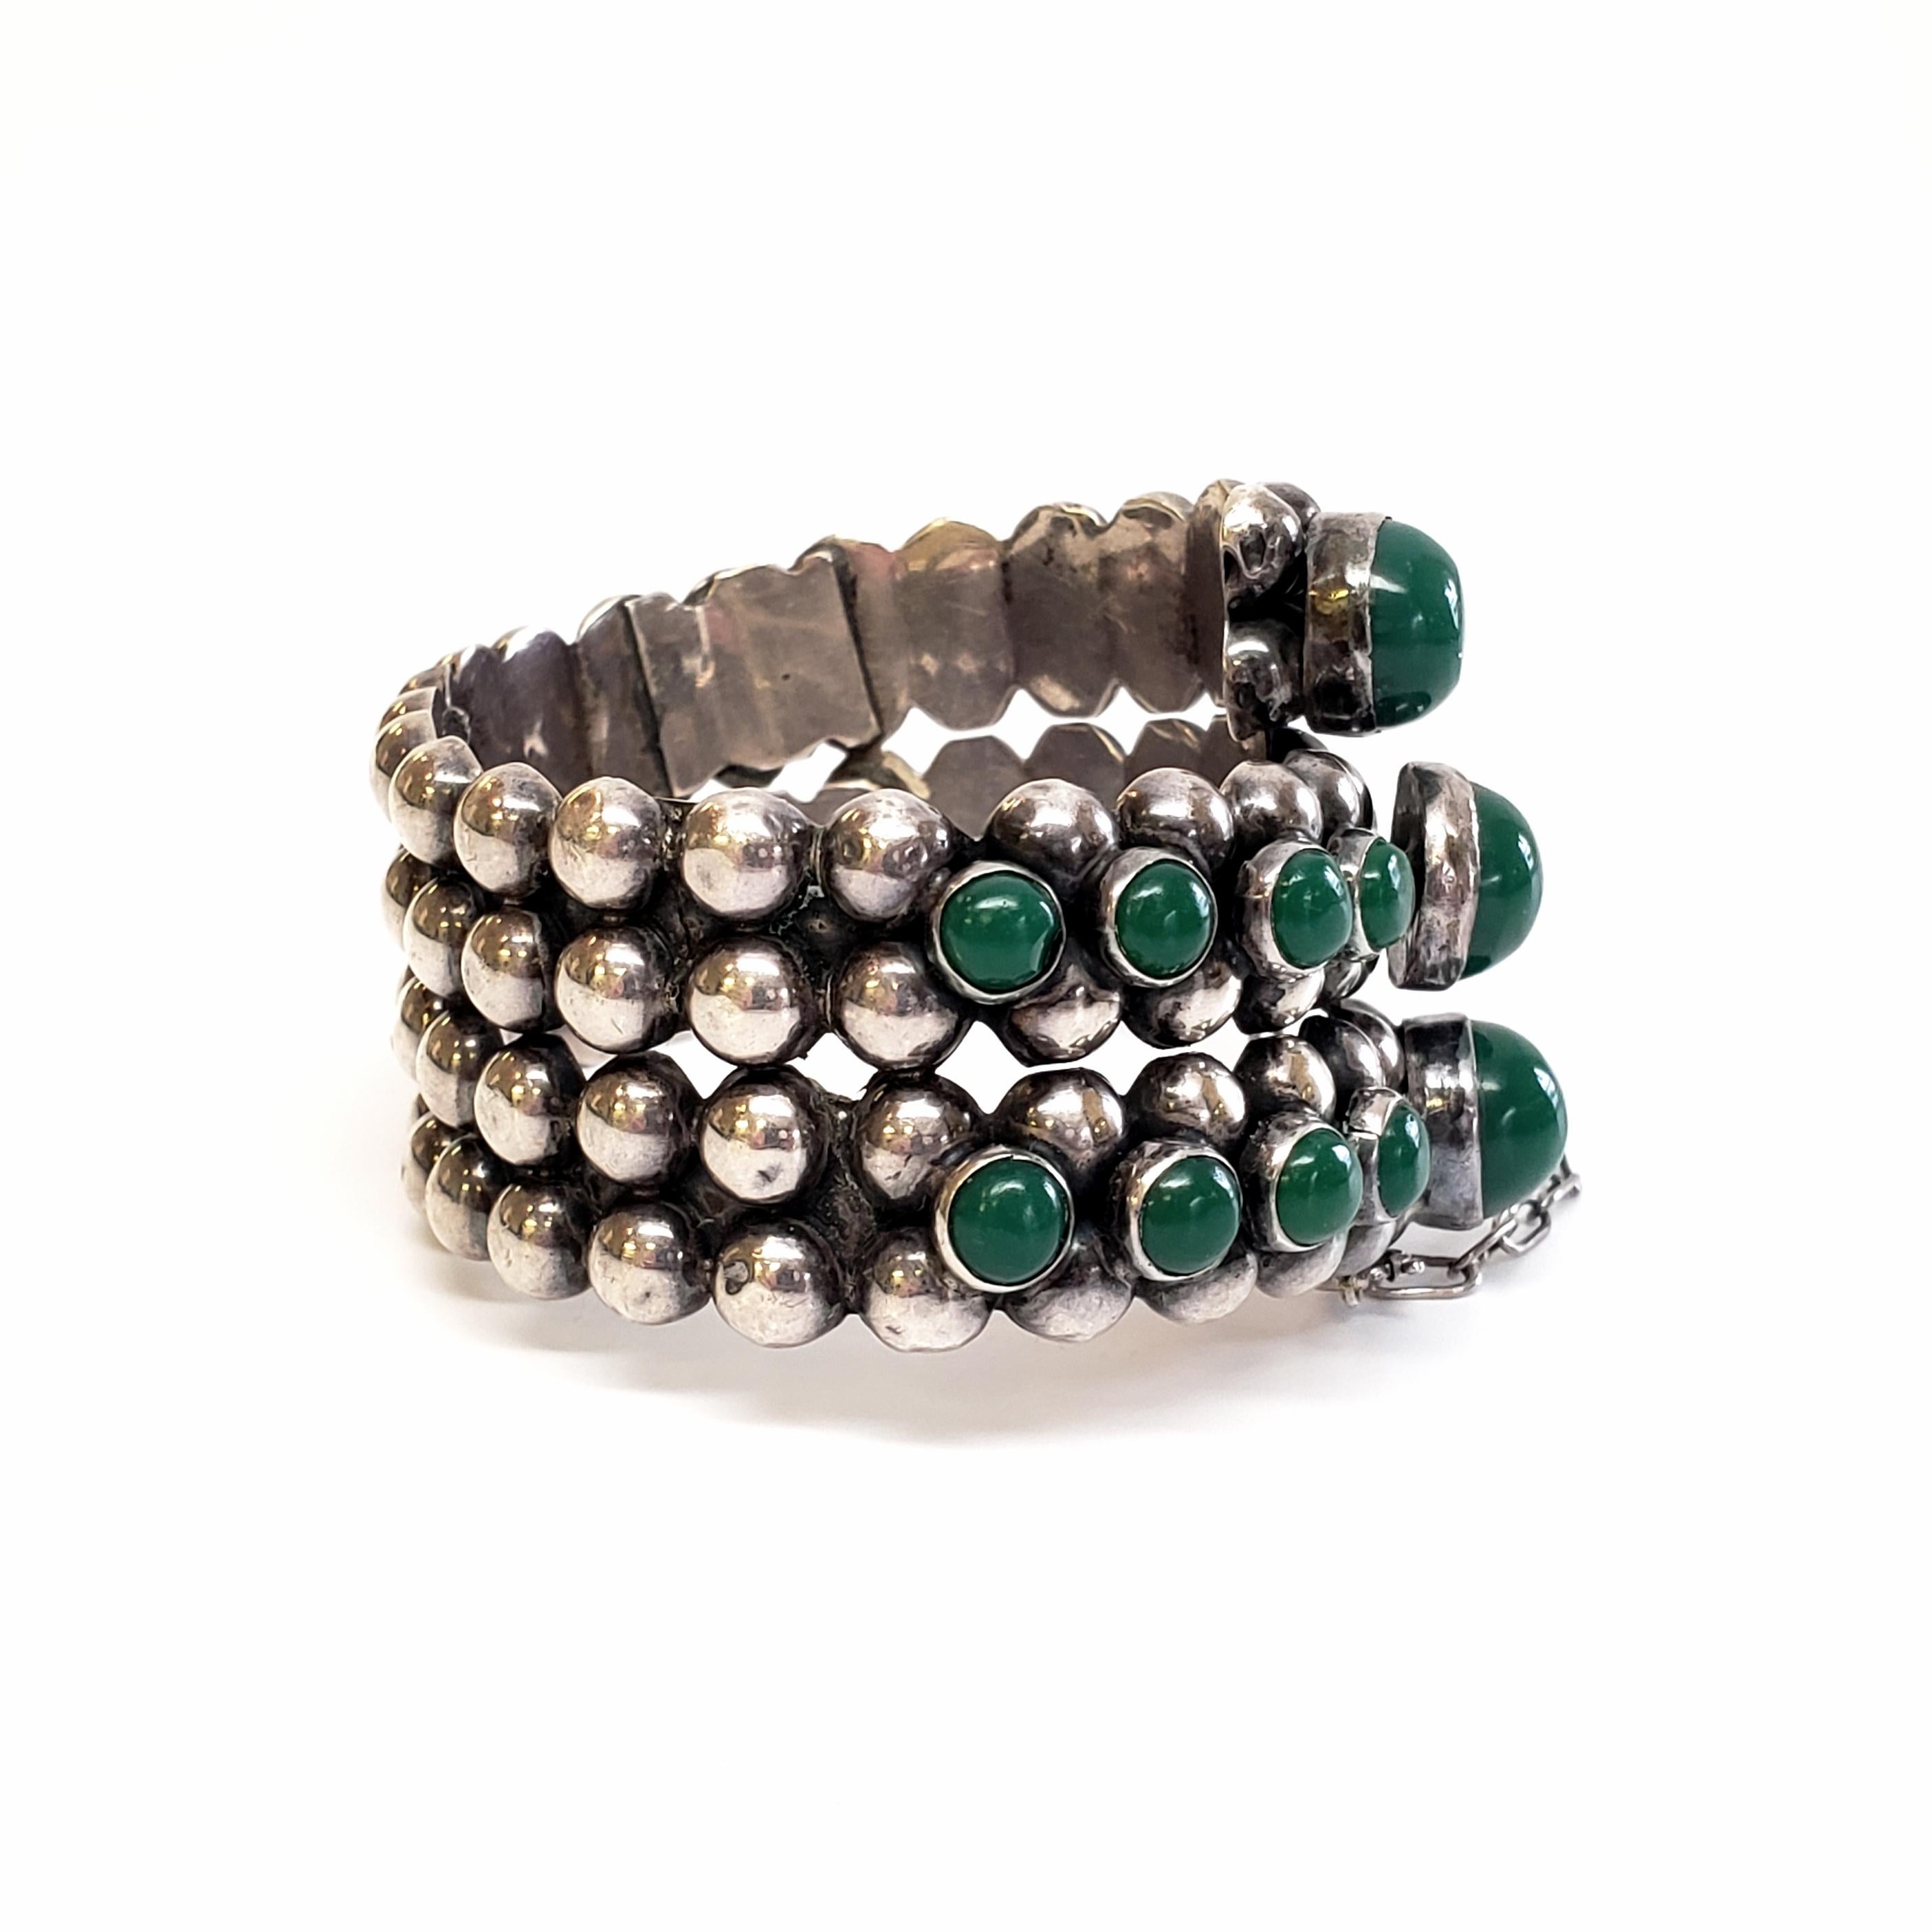 Vintage Taxco, Mexico Sterling Silver and green onyx hinged bracelet.

Beautiful silver bracelet by renowned master silversmith, Gonzalo Moreno. The traditional style bracelet features a beaded design and round, bezel-set green onyx stones. Slide